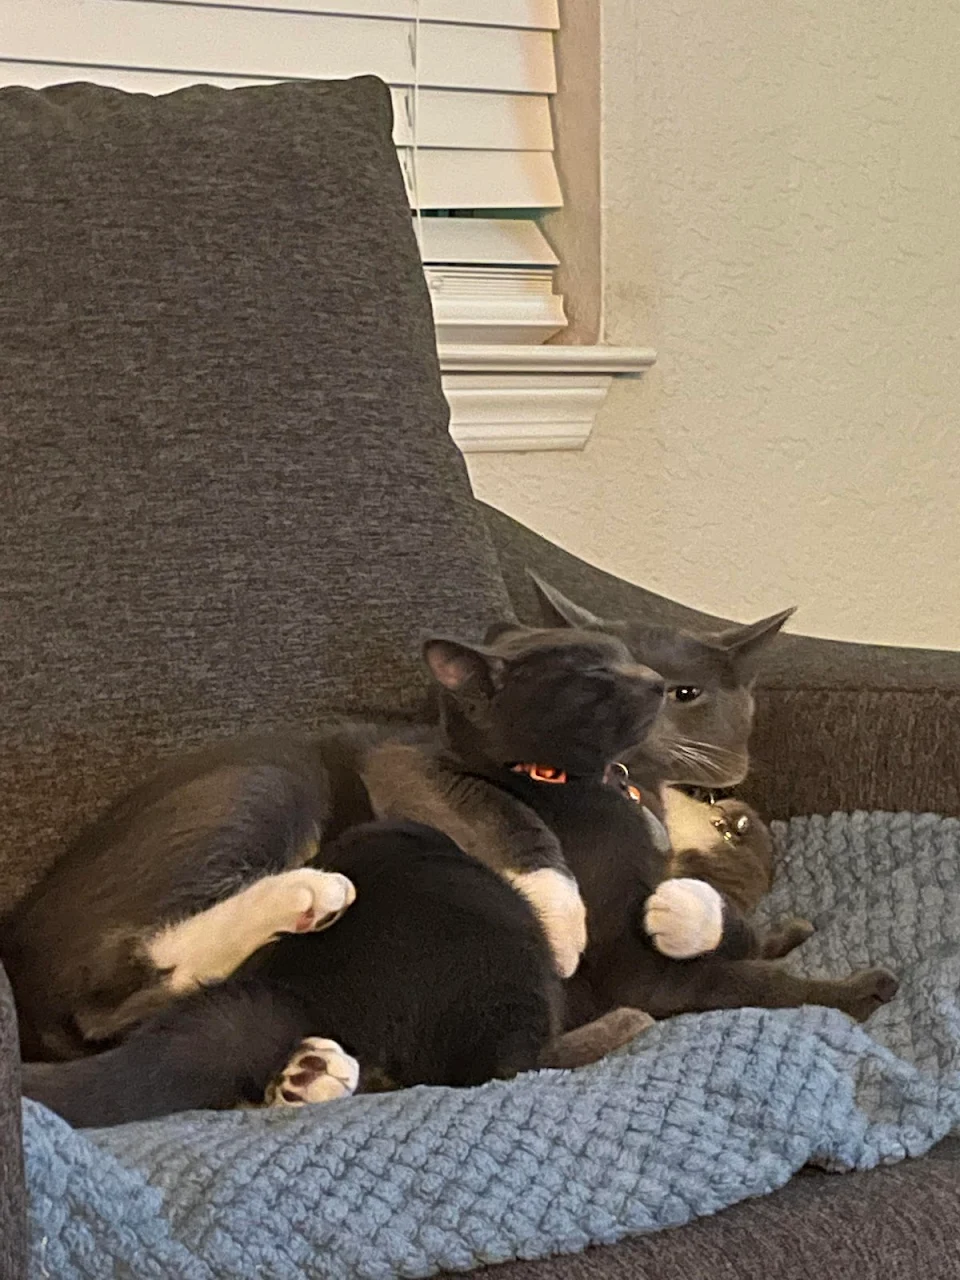 I think my cat is possessive of the new kitten